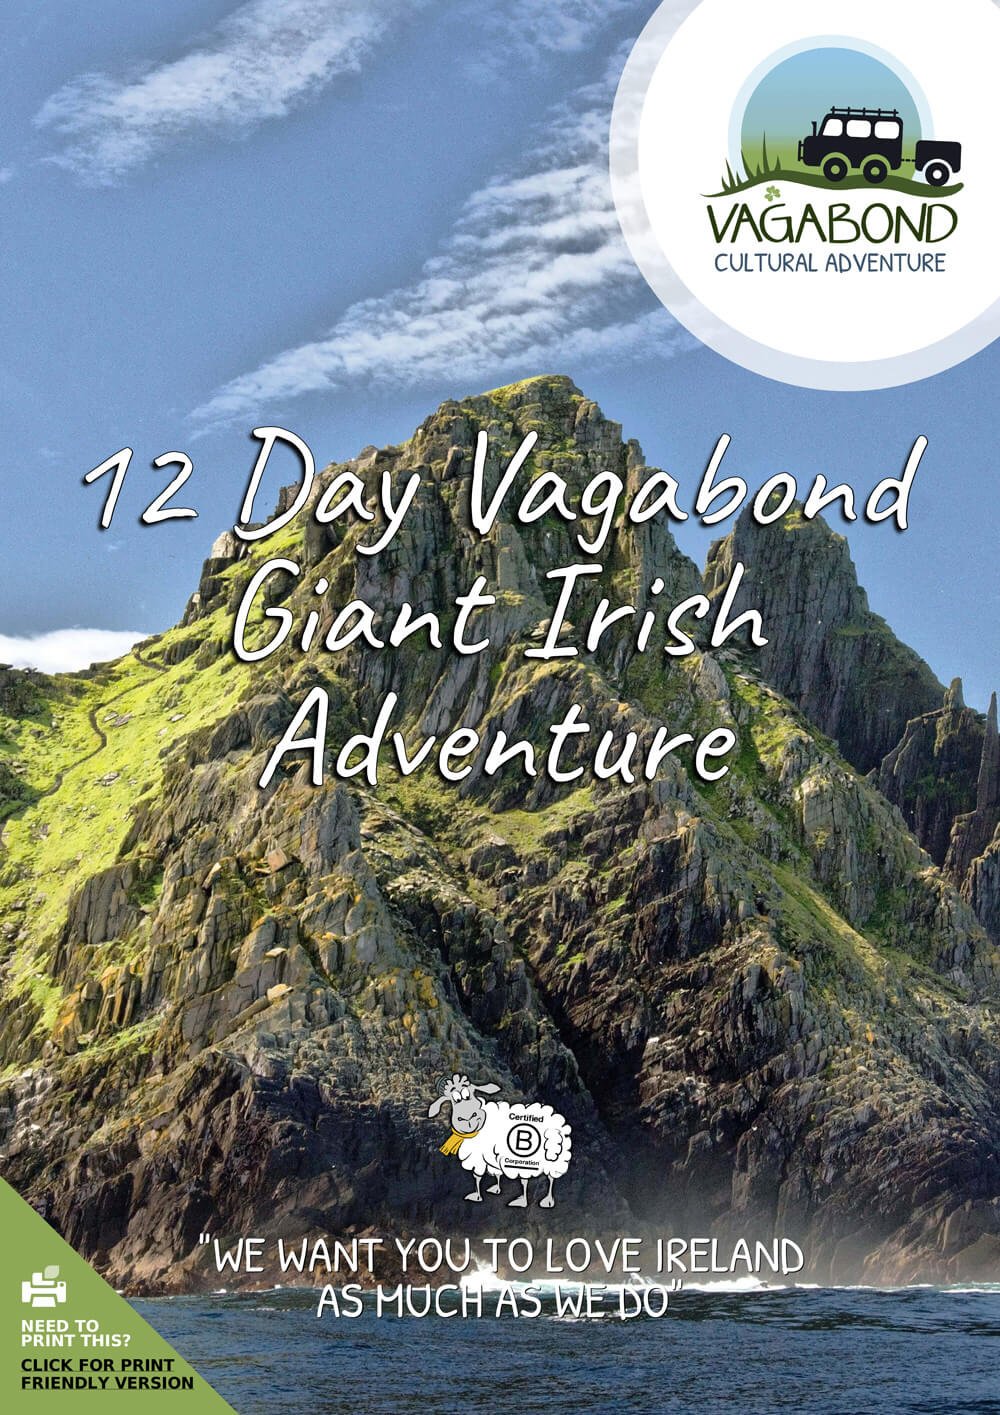 12 Day Vagabond Giant Irish Adventure Tour itinerary cover with Skellig Michael Island in Ireland